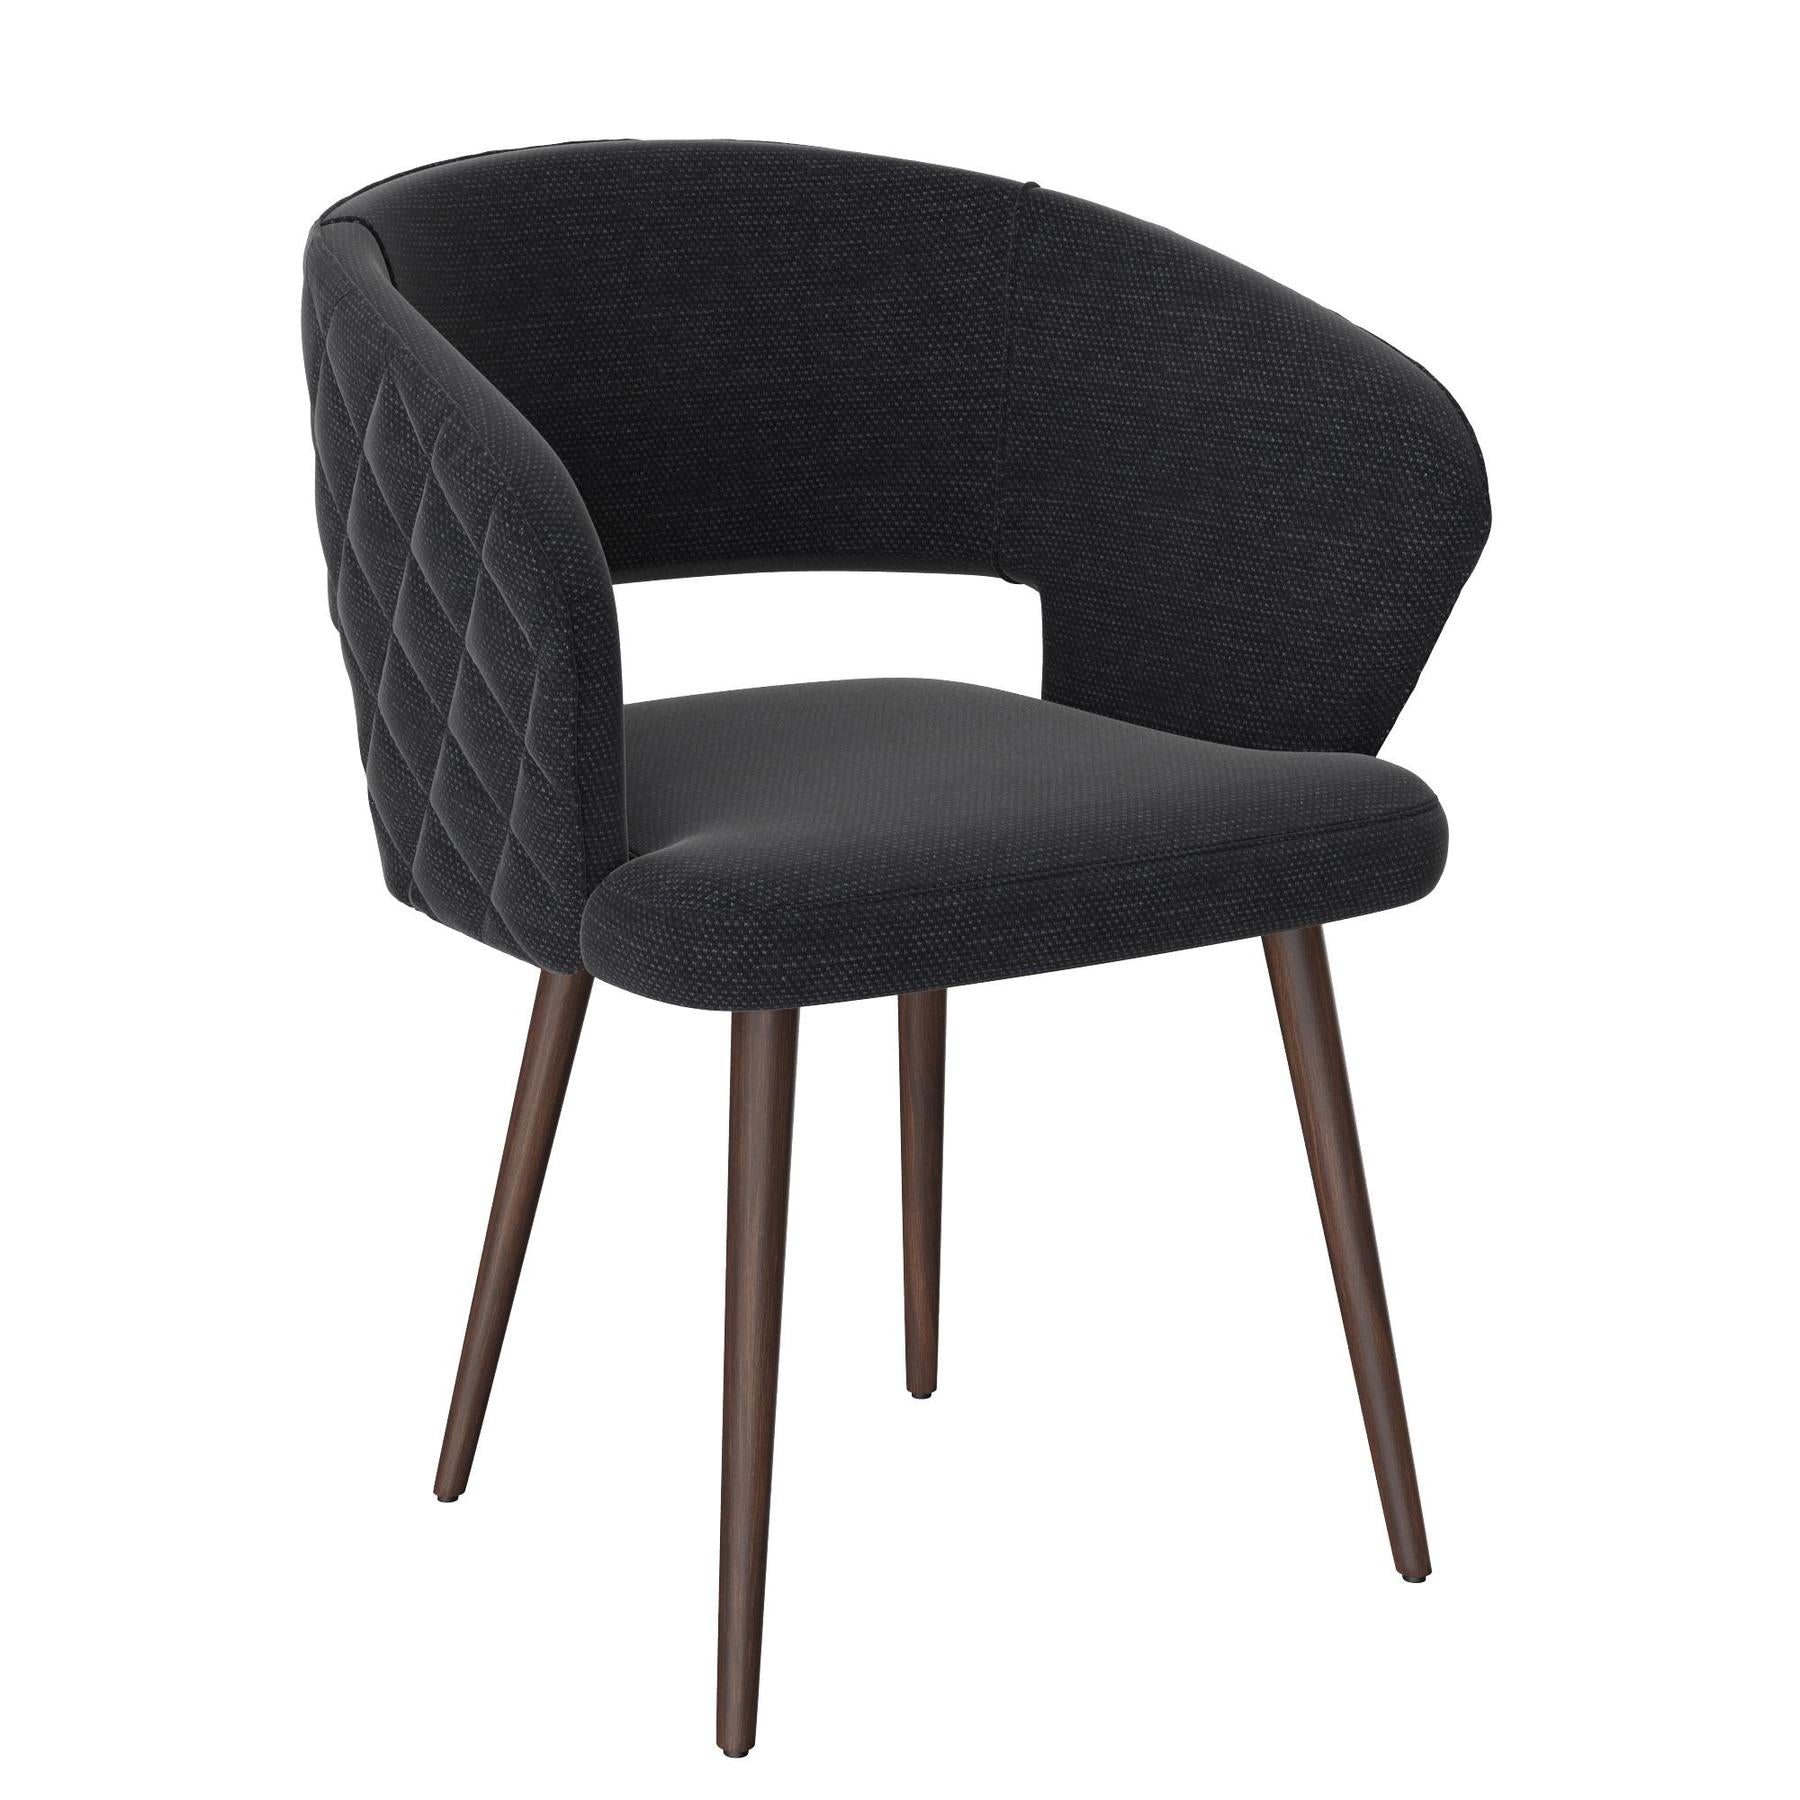 Napoli Barrel Back , Mid-Century Modern design, upholstered dining chair in Black with Brown Wood legs in white background the front view.